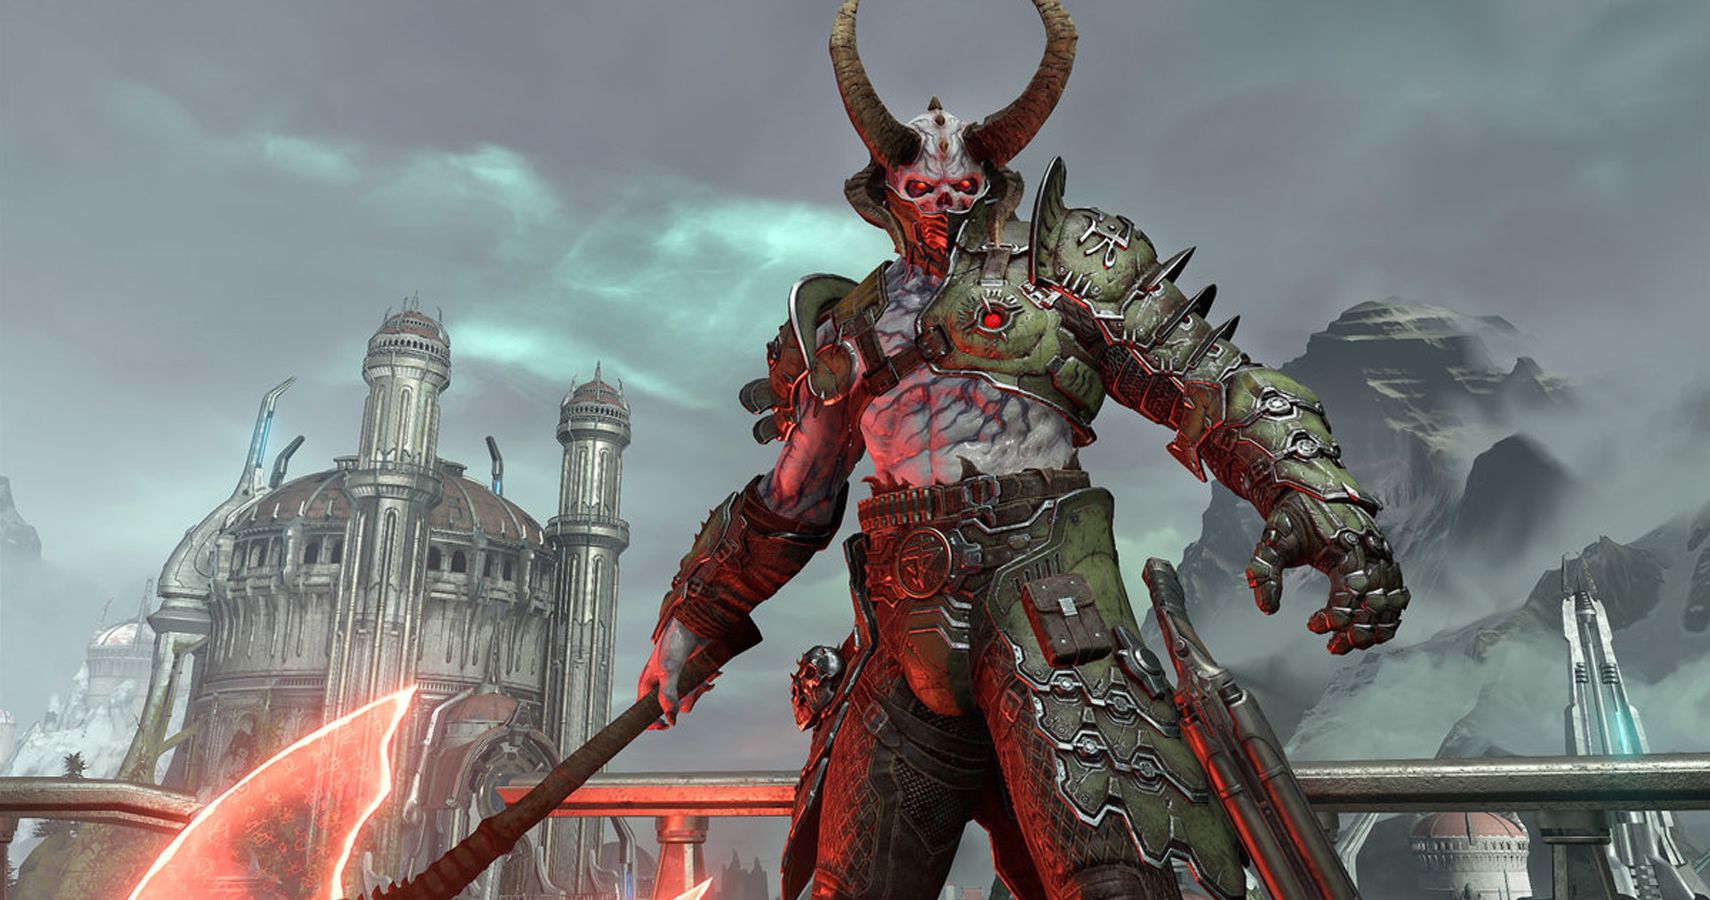 DOOM Eternal: Does It To Beat The Game?